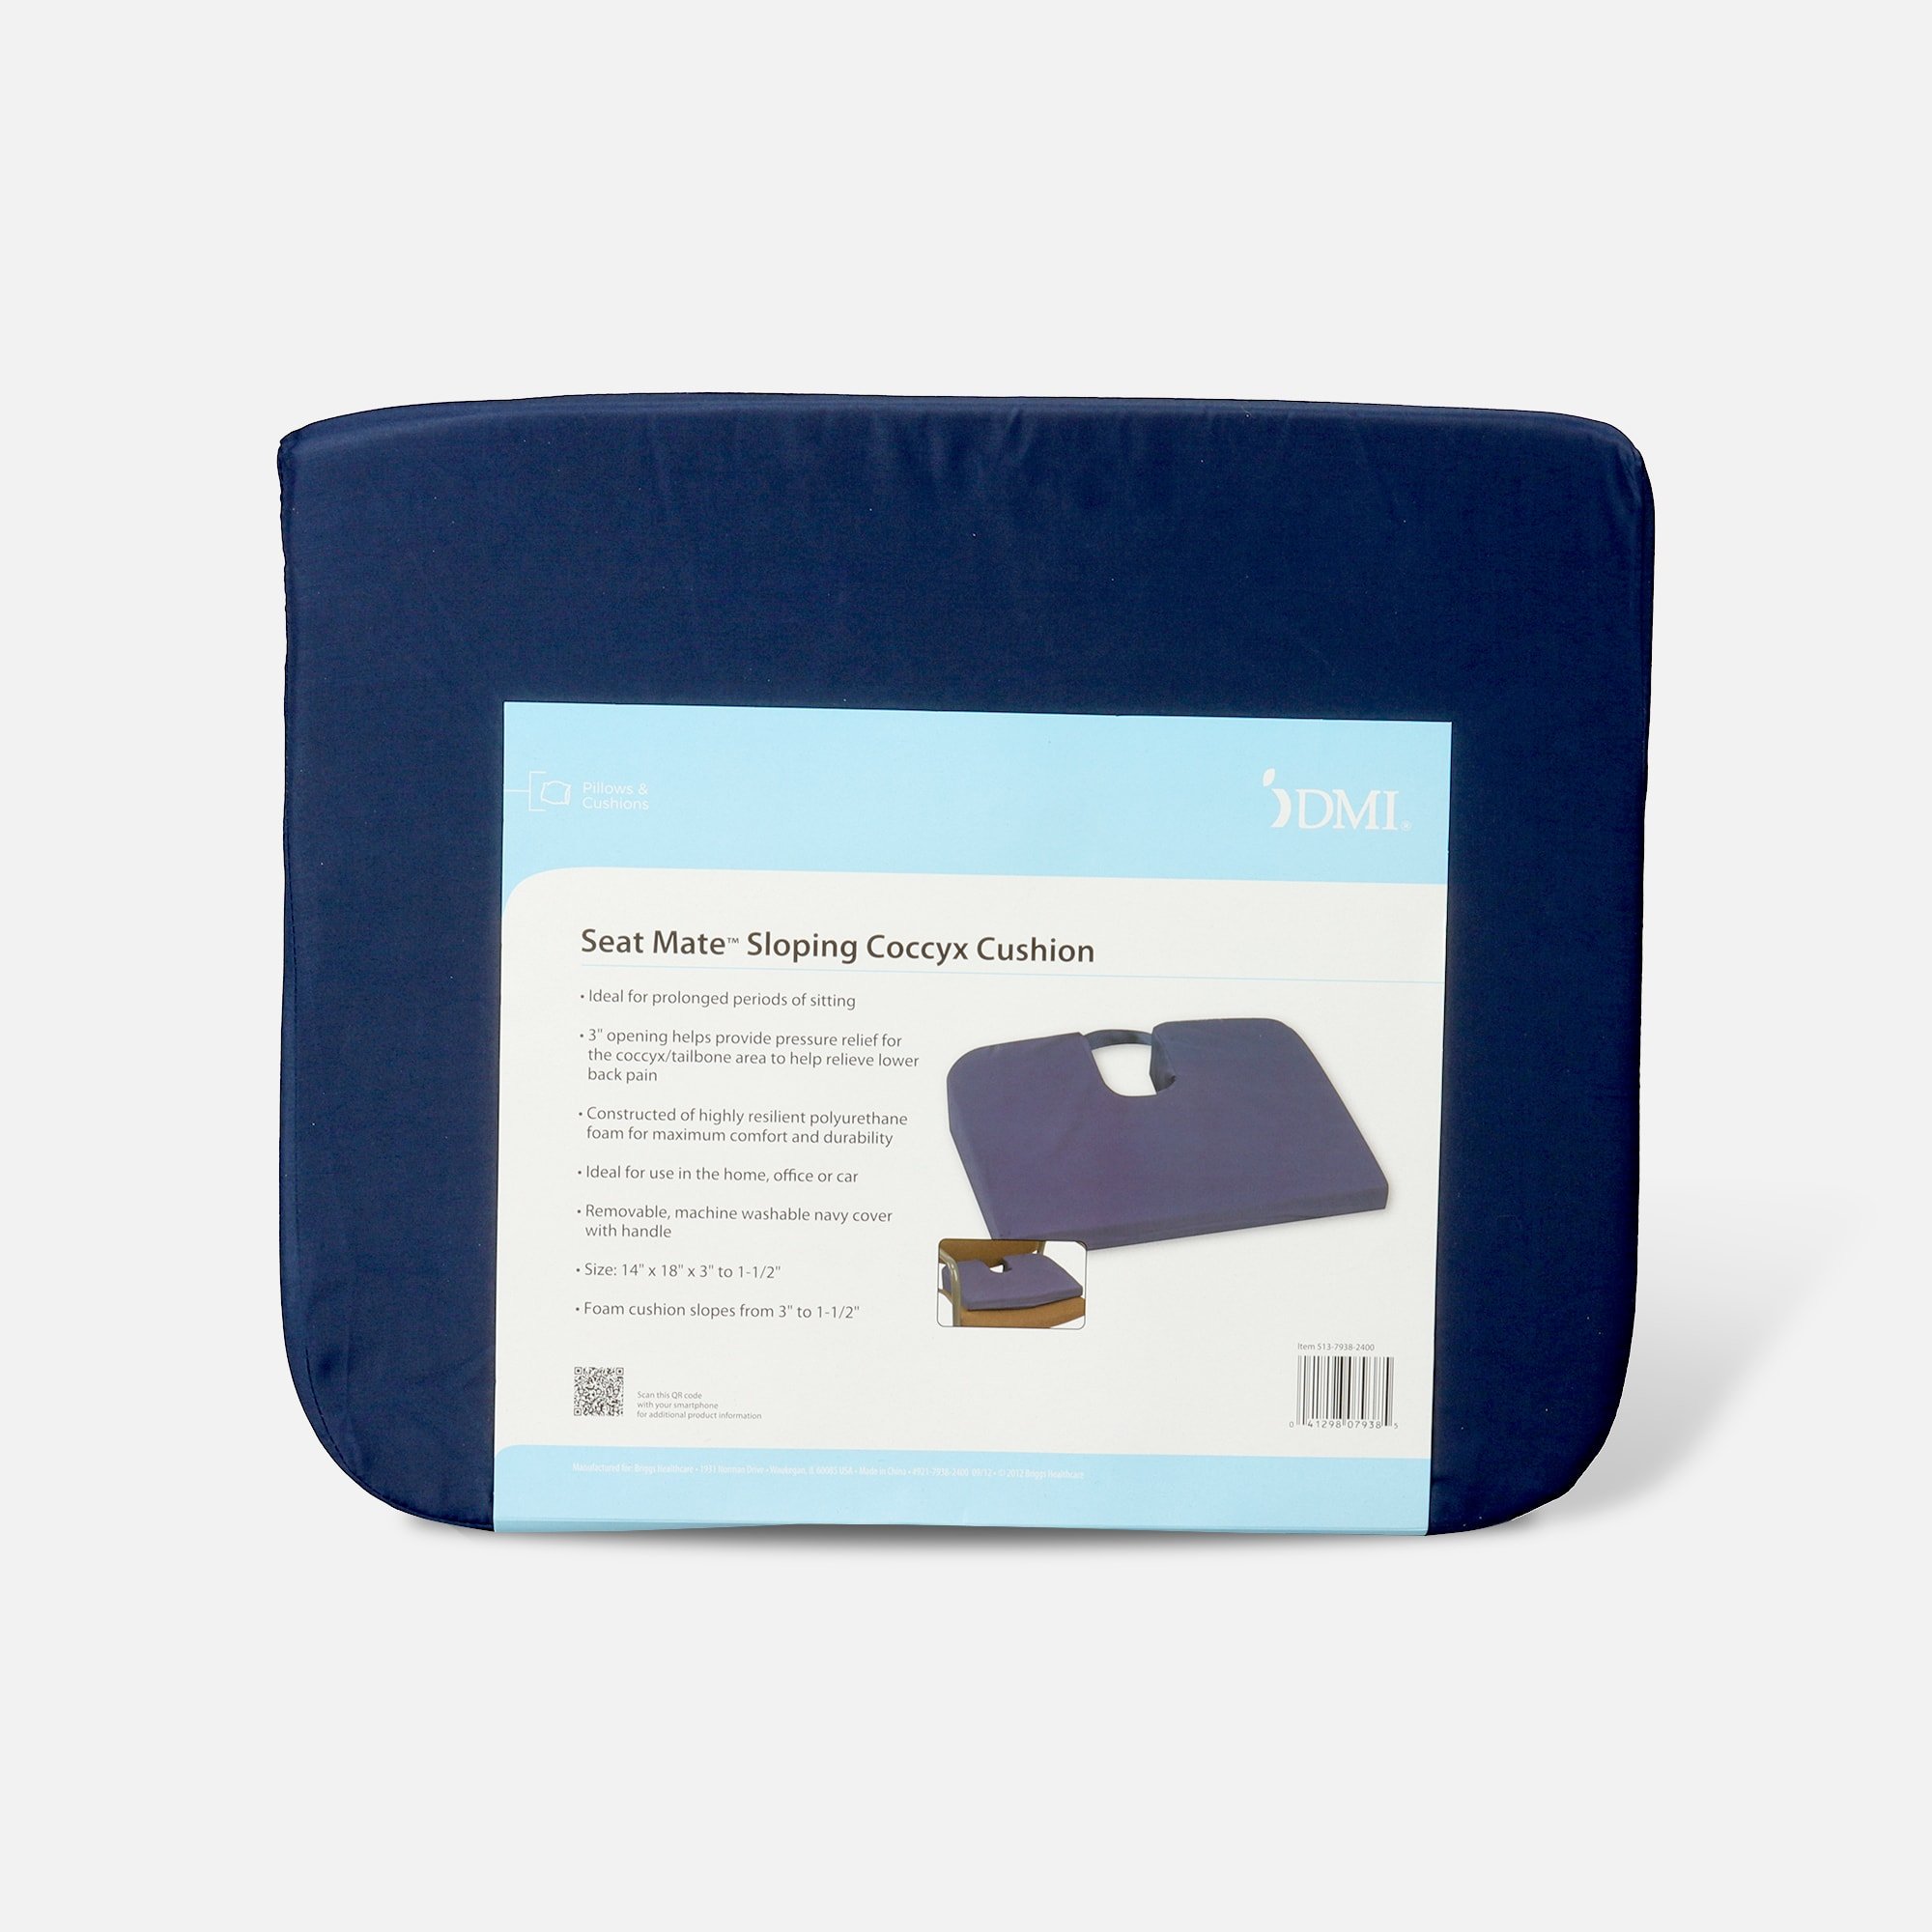 https://hsastore.com/on/demandware.static/-/Sites-hec-master/default/dwc142a926/images/large/foam-seat-cushion-for-coccyx-support-18-x-14-x-1-5-to-3-inches-navy-18201-1.jpg